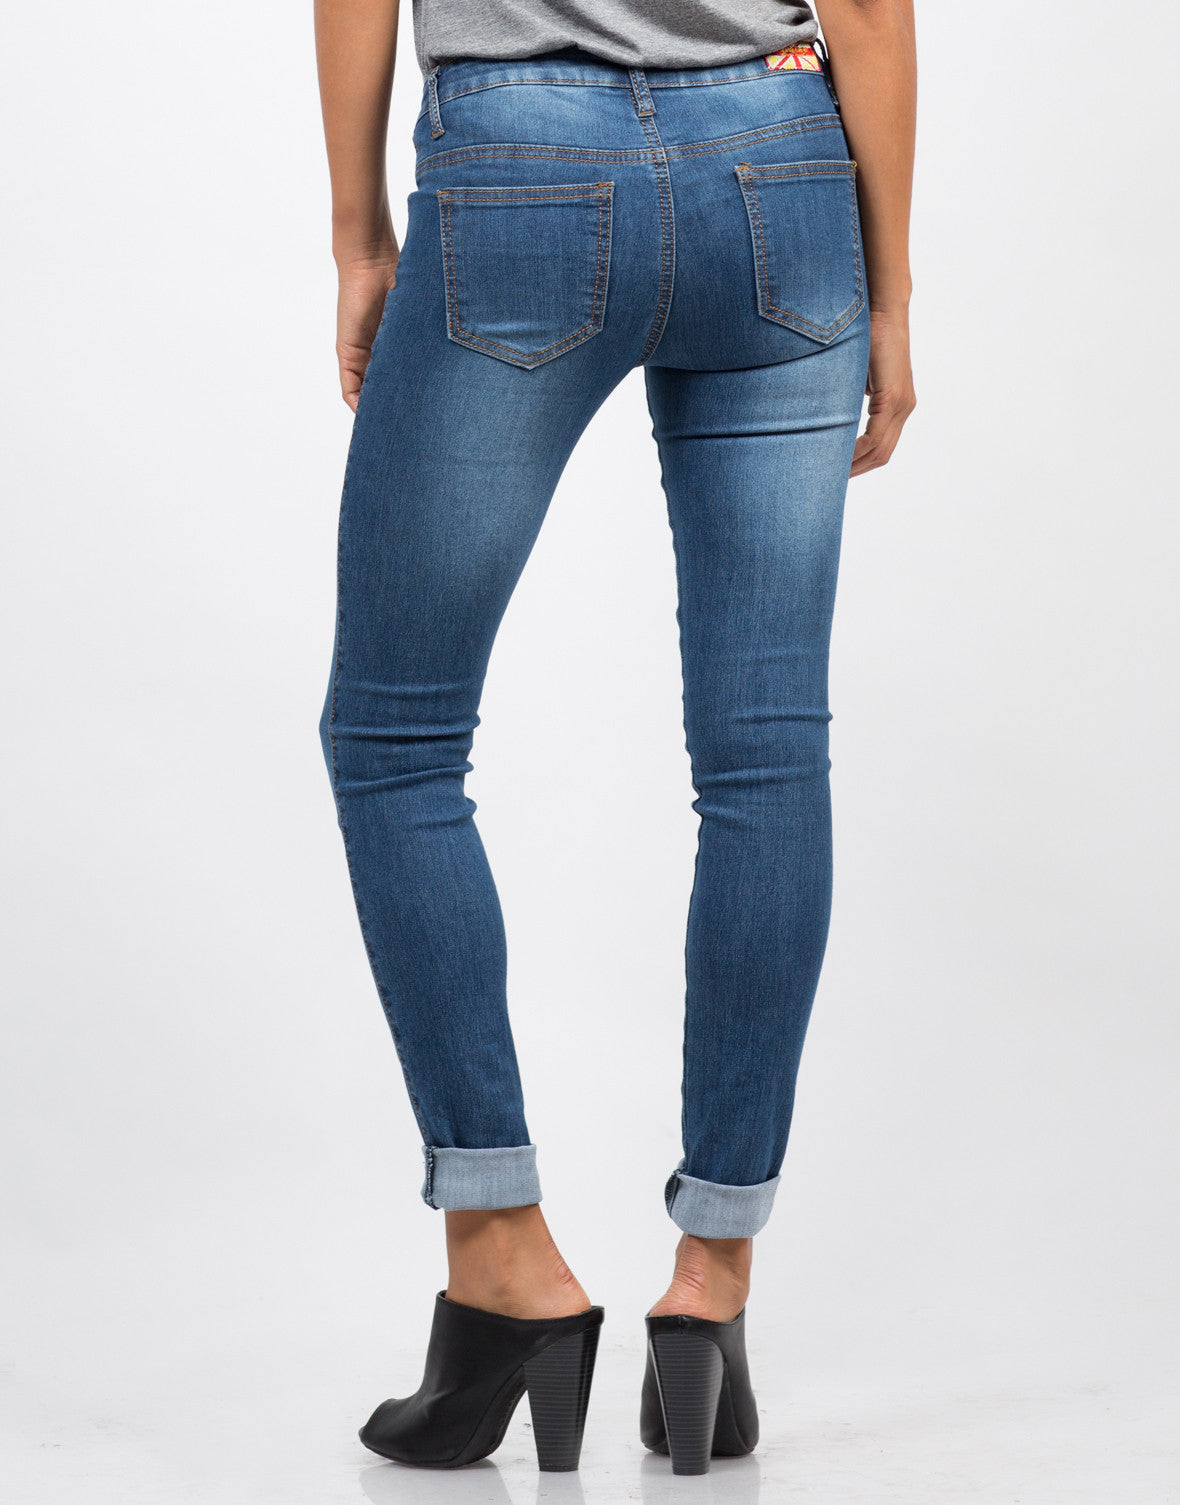 Classic Blue Skinny Jeans - Blue Denim - Faded Jeans – 2020AVE